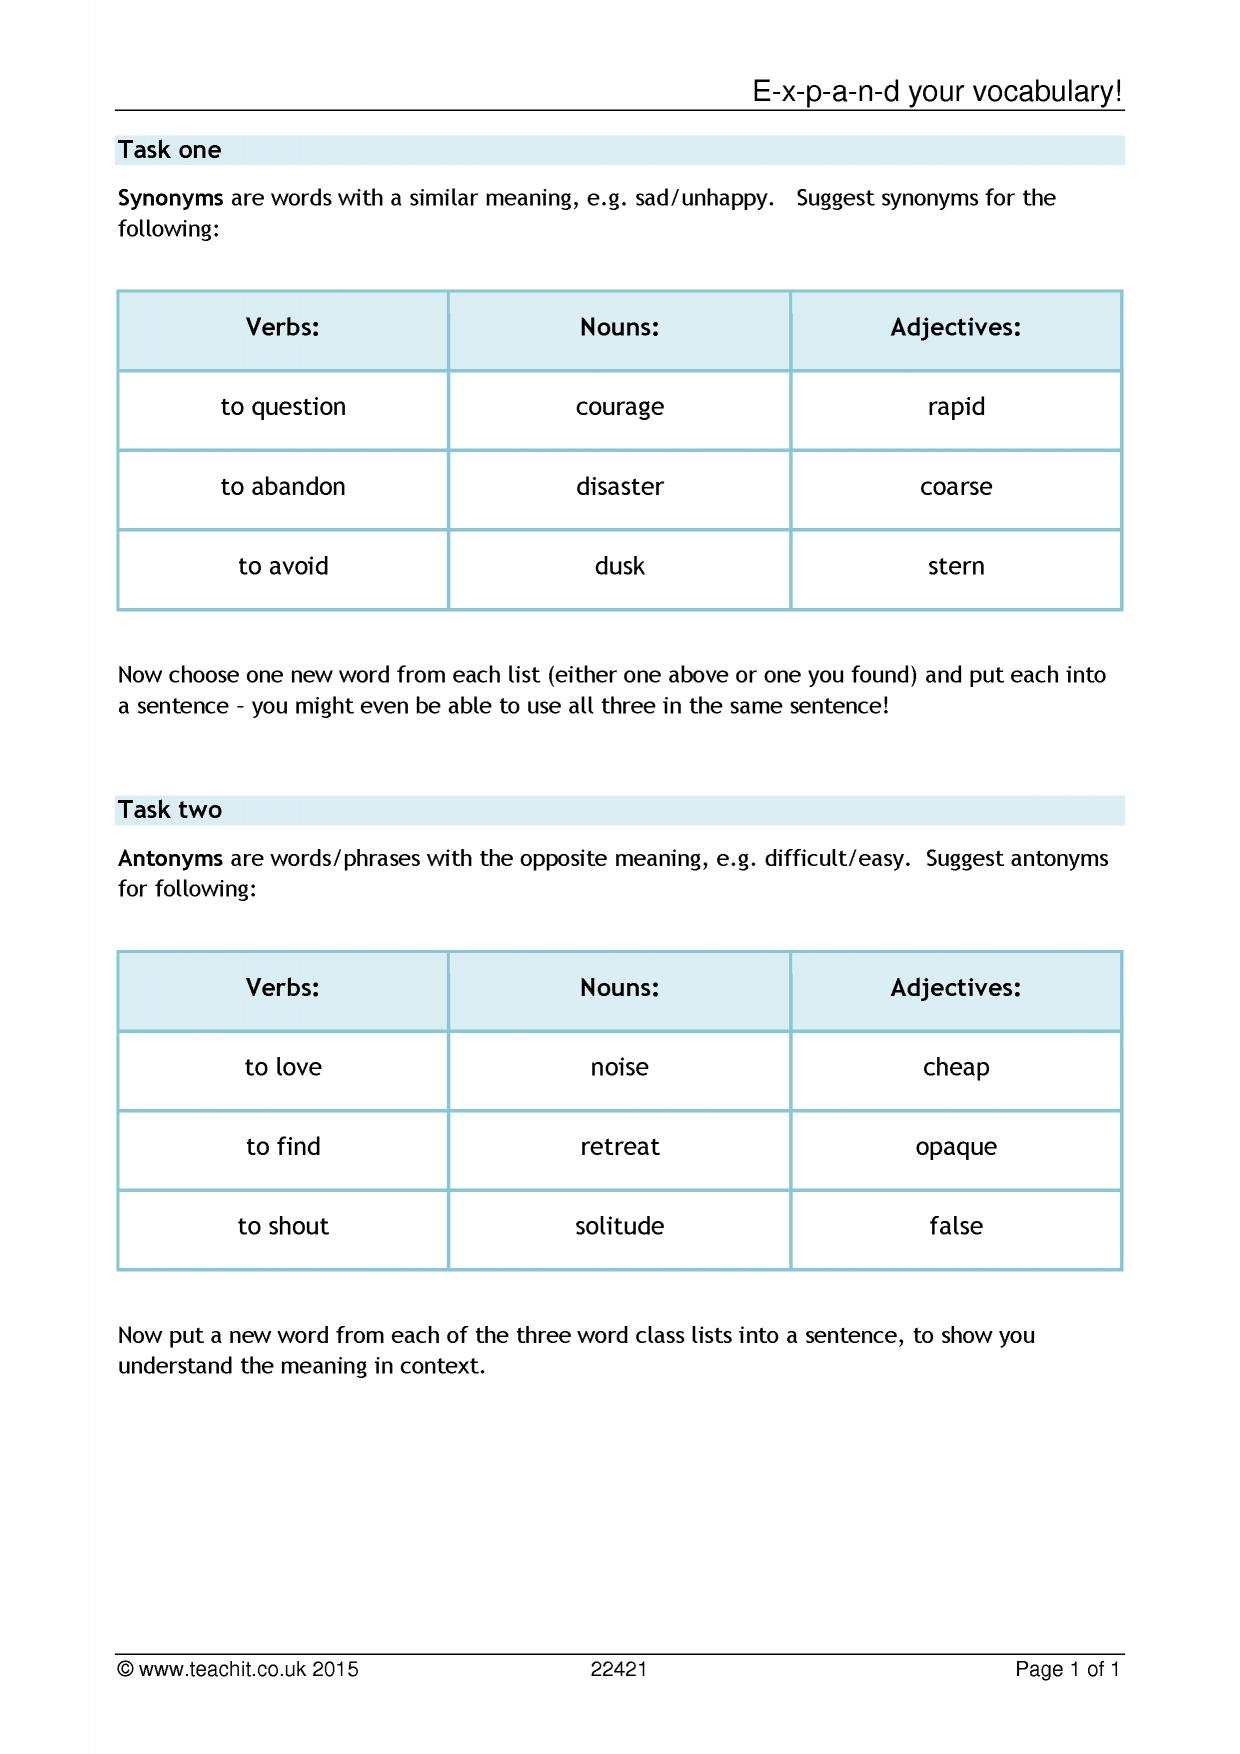 developing-vocabulary-ks3-grammar-and-vocabulary-key-stage-3-resources